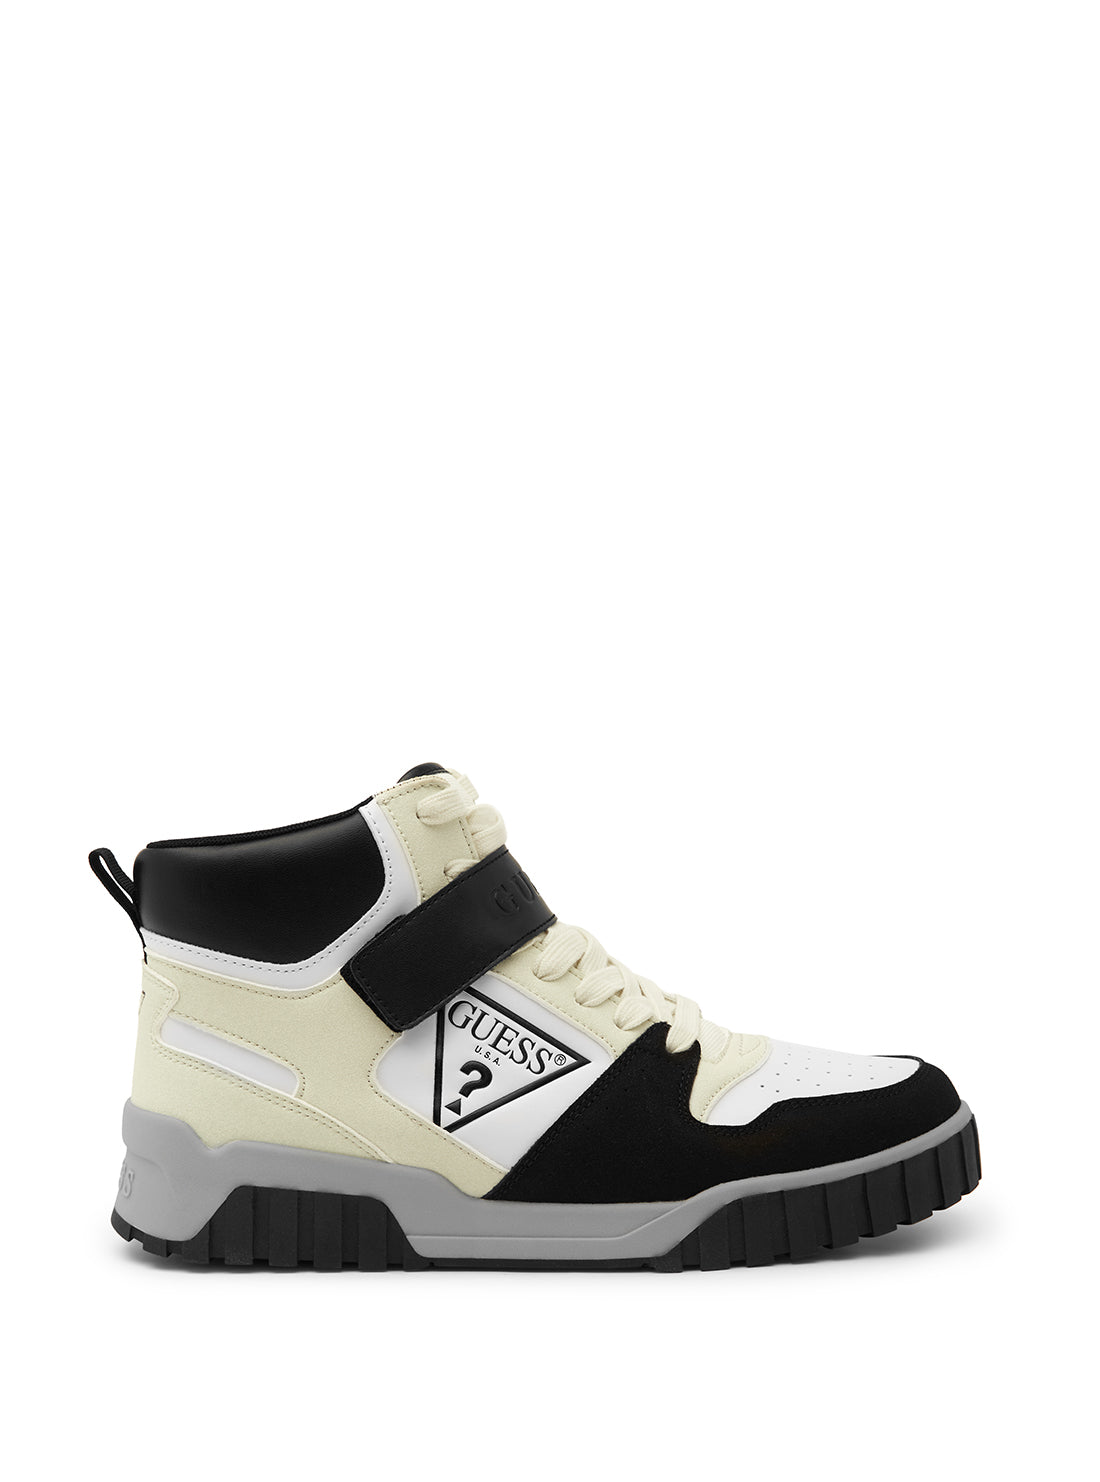 Rojero High-Top Sneakers